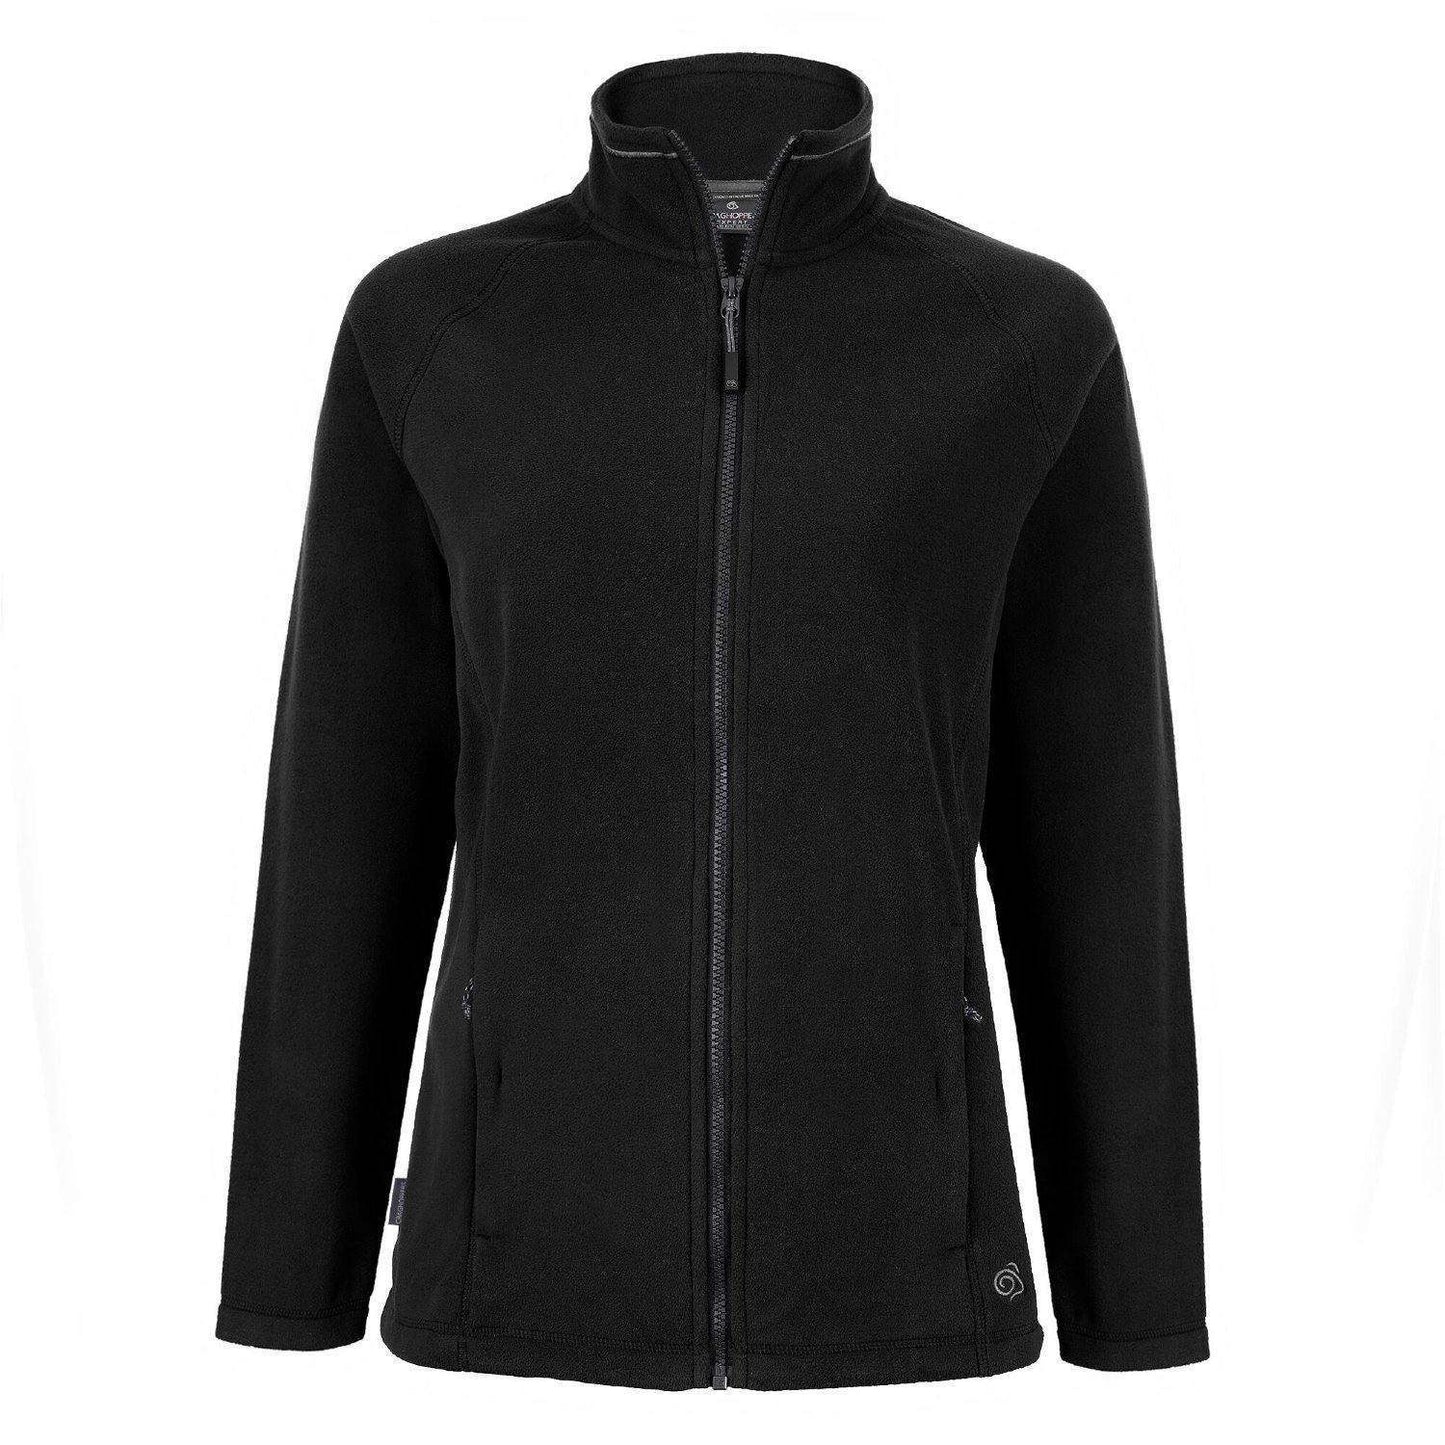 Women's Expert Miska 200 Fleece by Craghoppers - The Luxury Promotional Gifts Company Limited